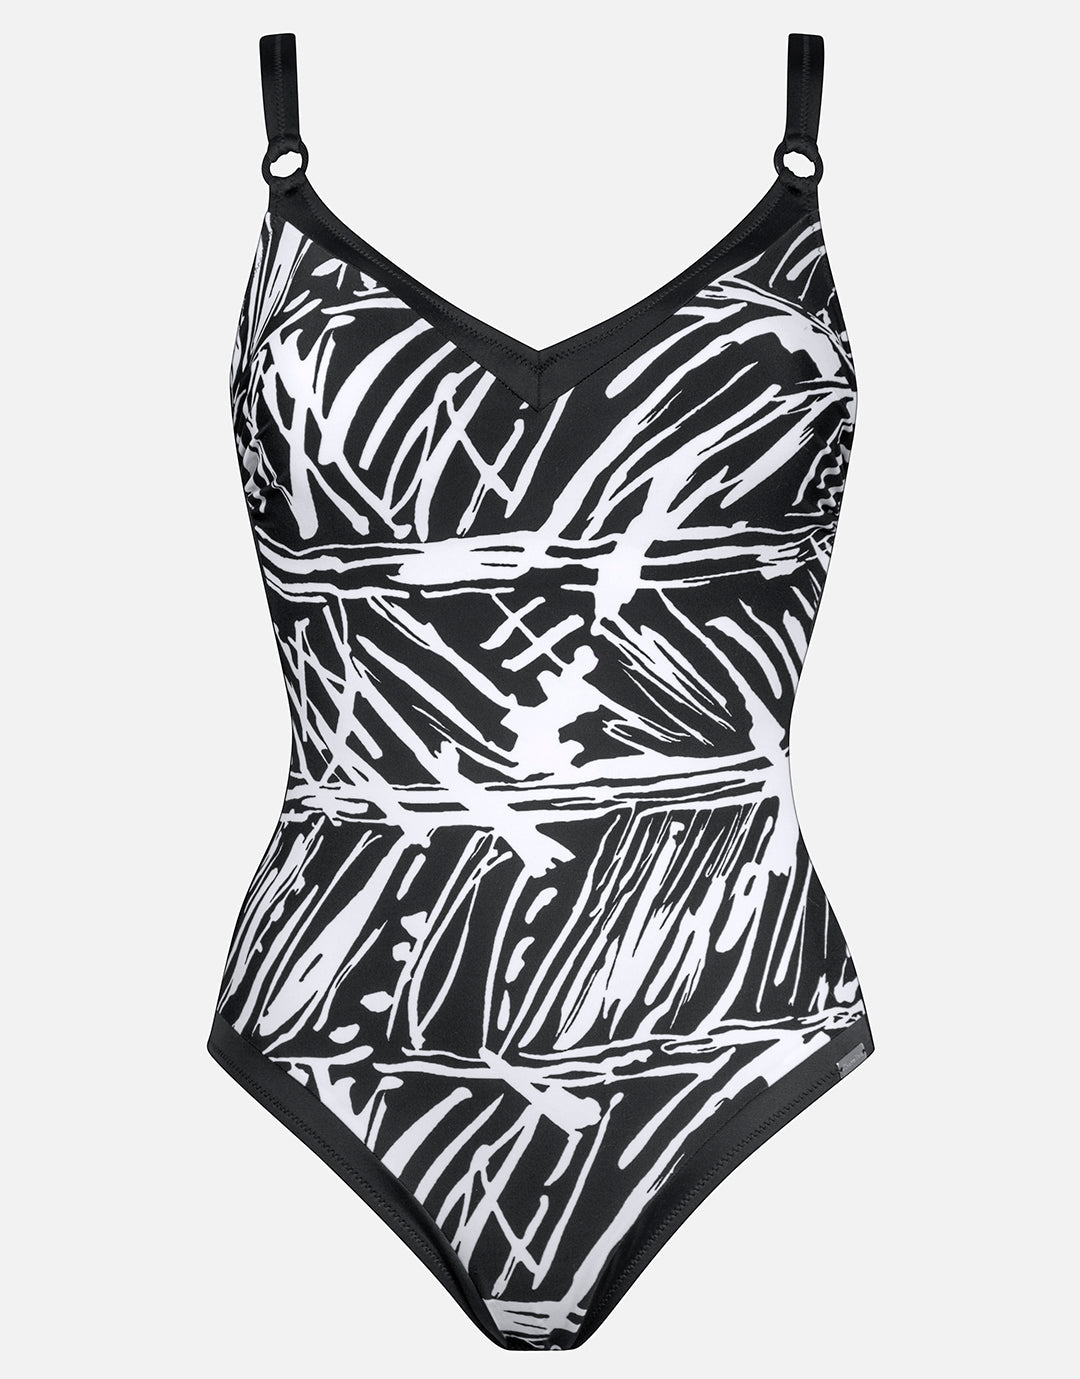 Ink Art Underwired Swimsuit - Black and White